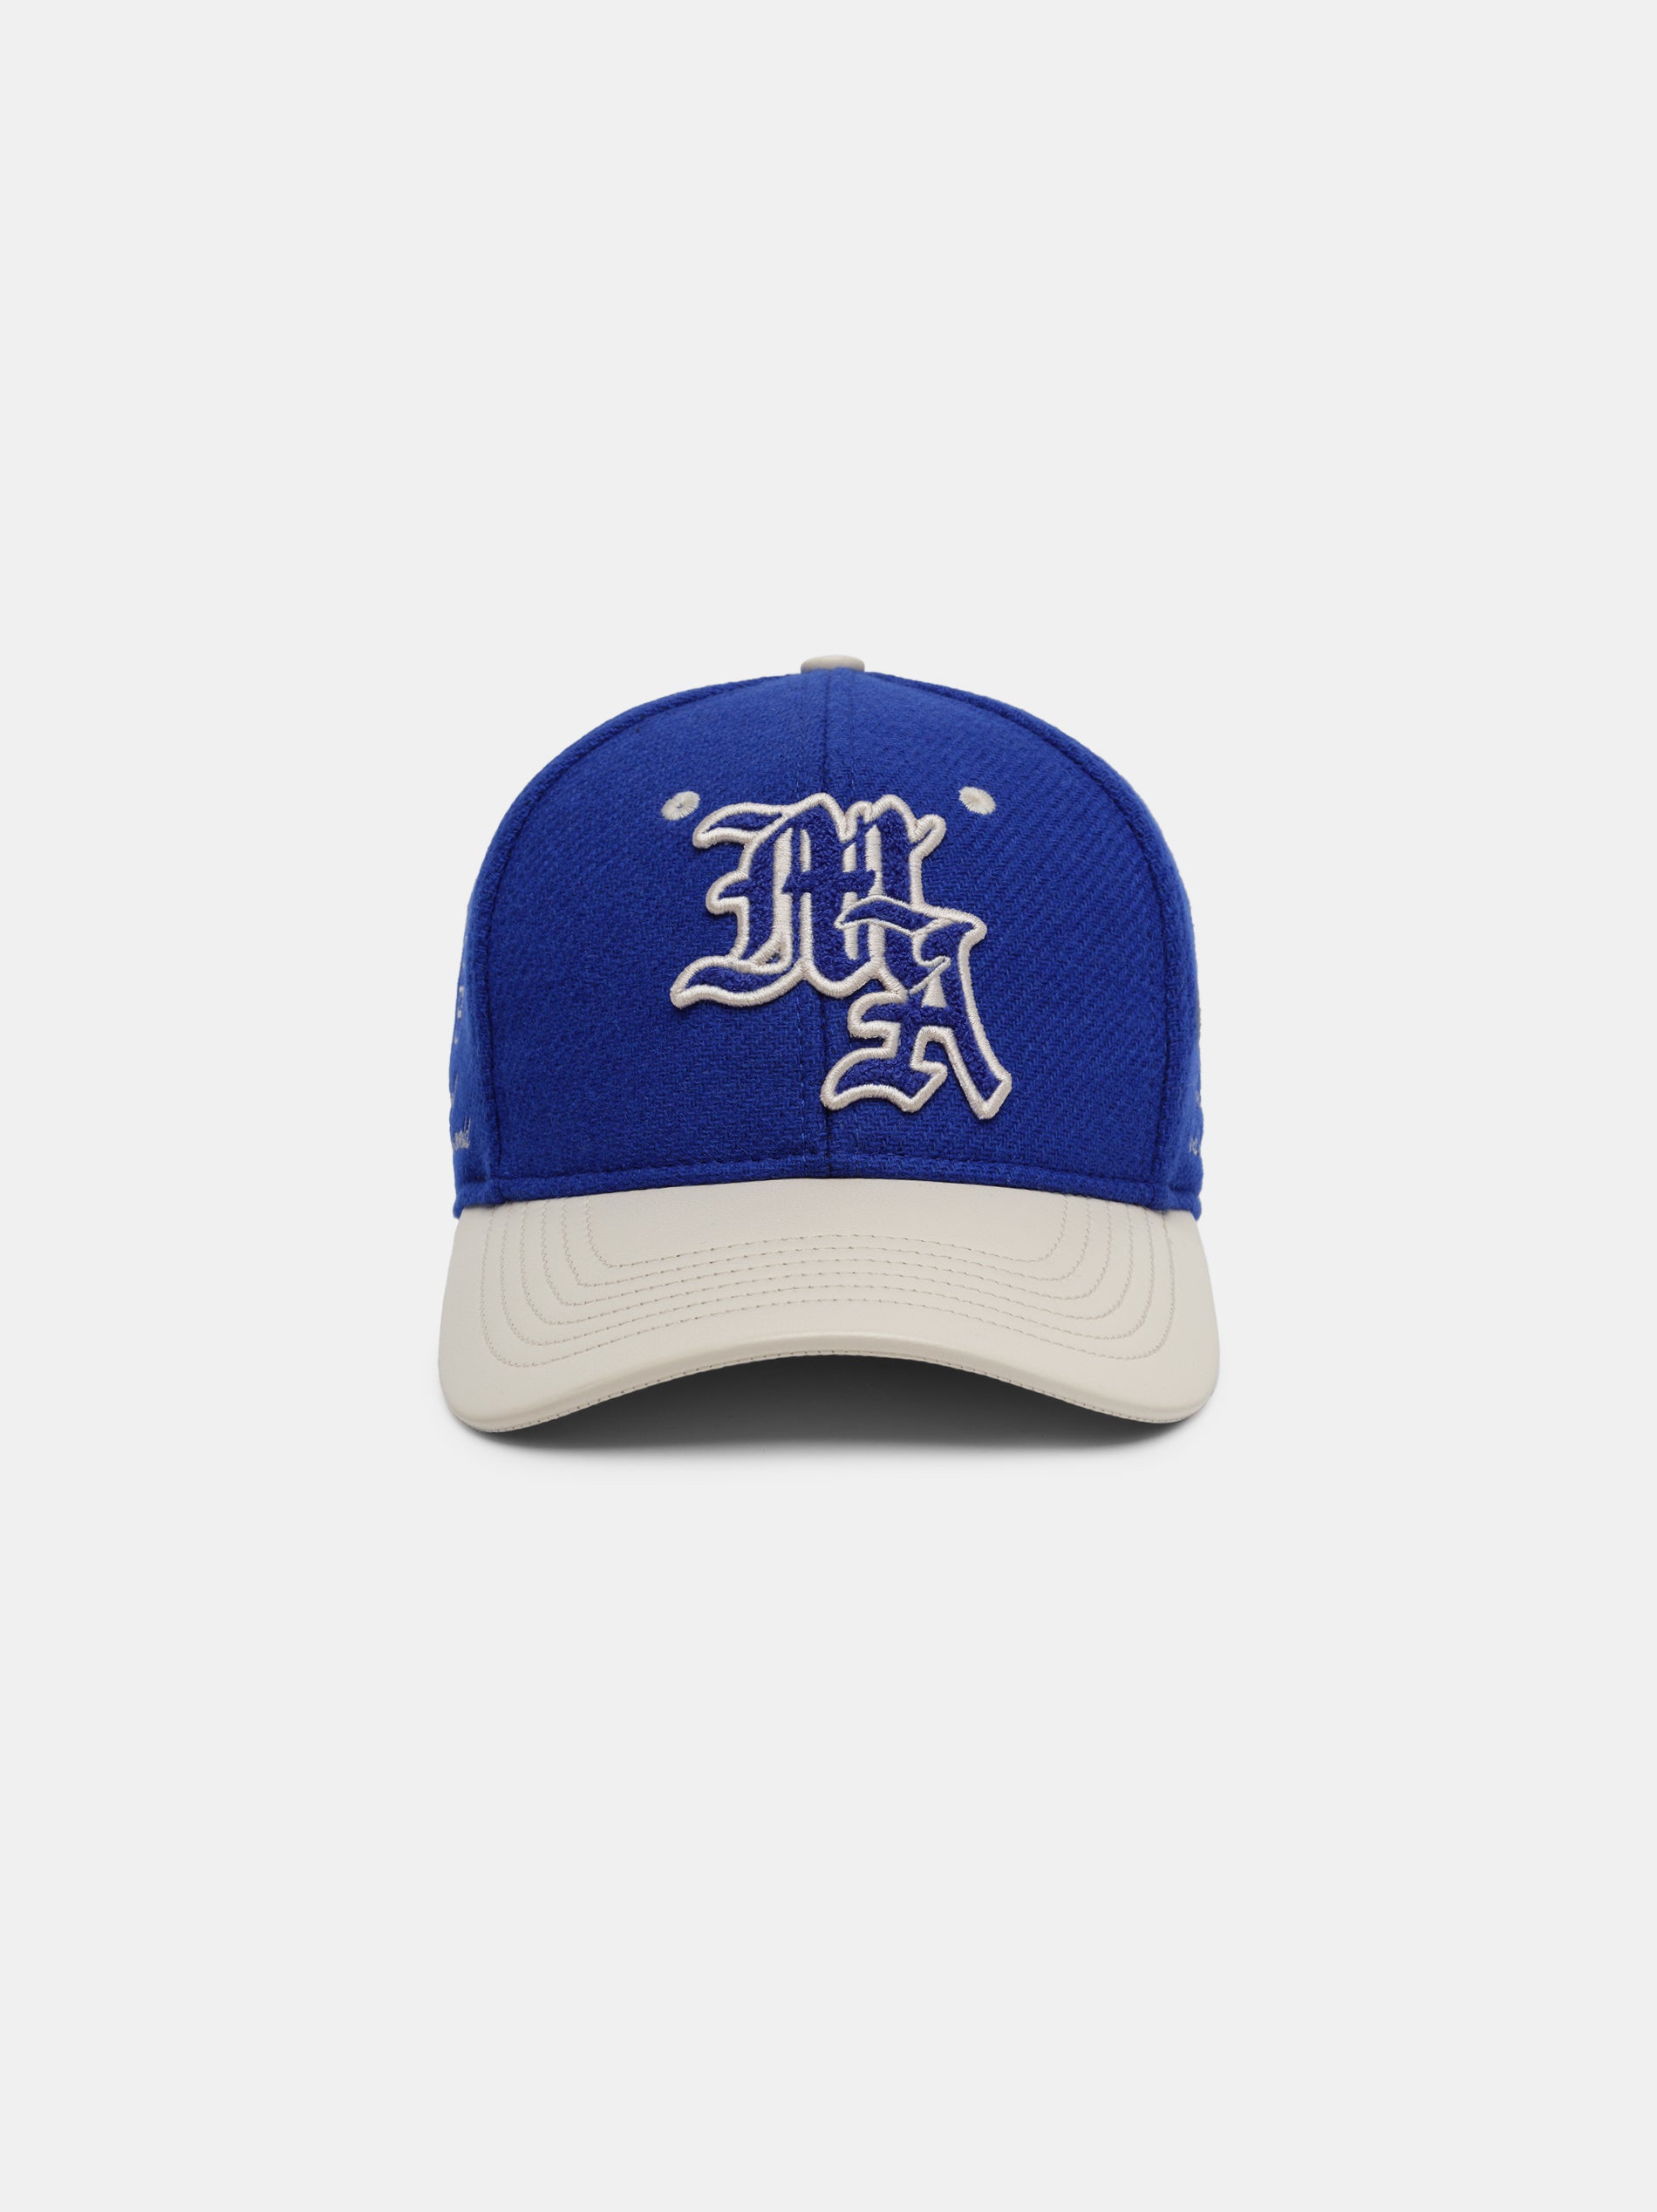 Product MA SPIRIT TWO-TONE HAT - Blue featured image